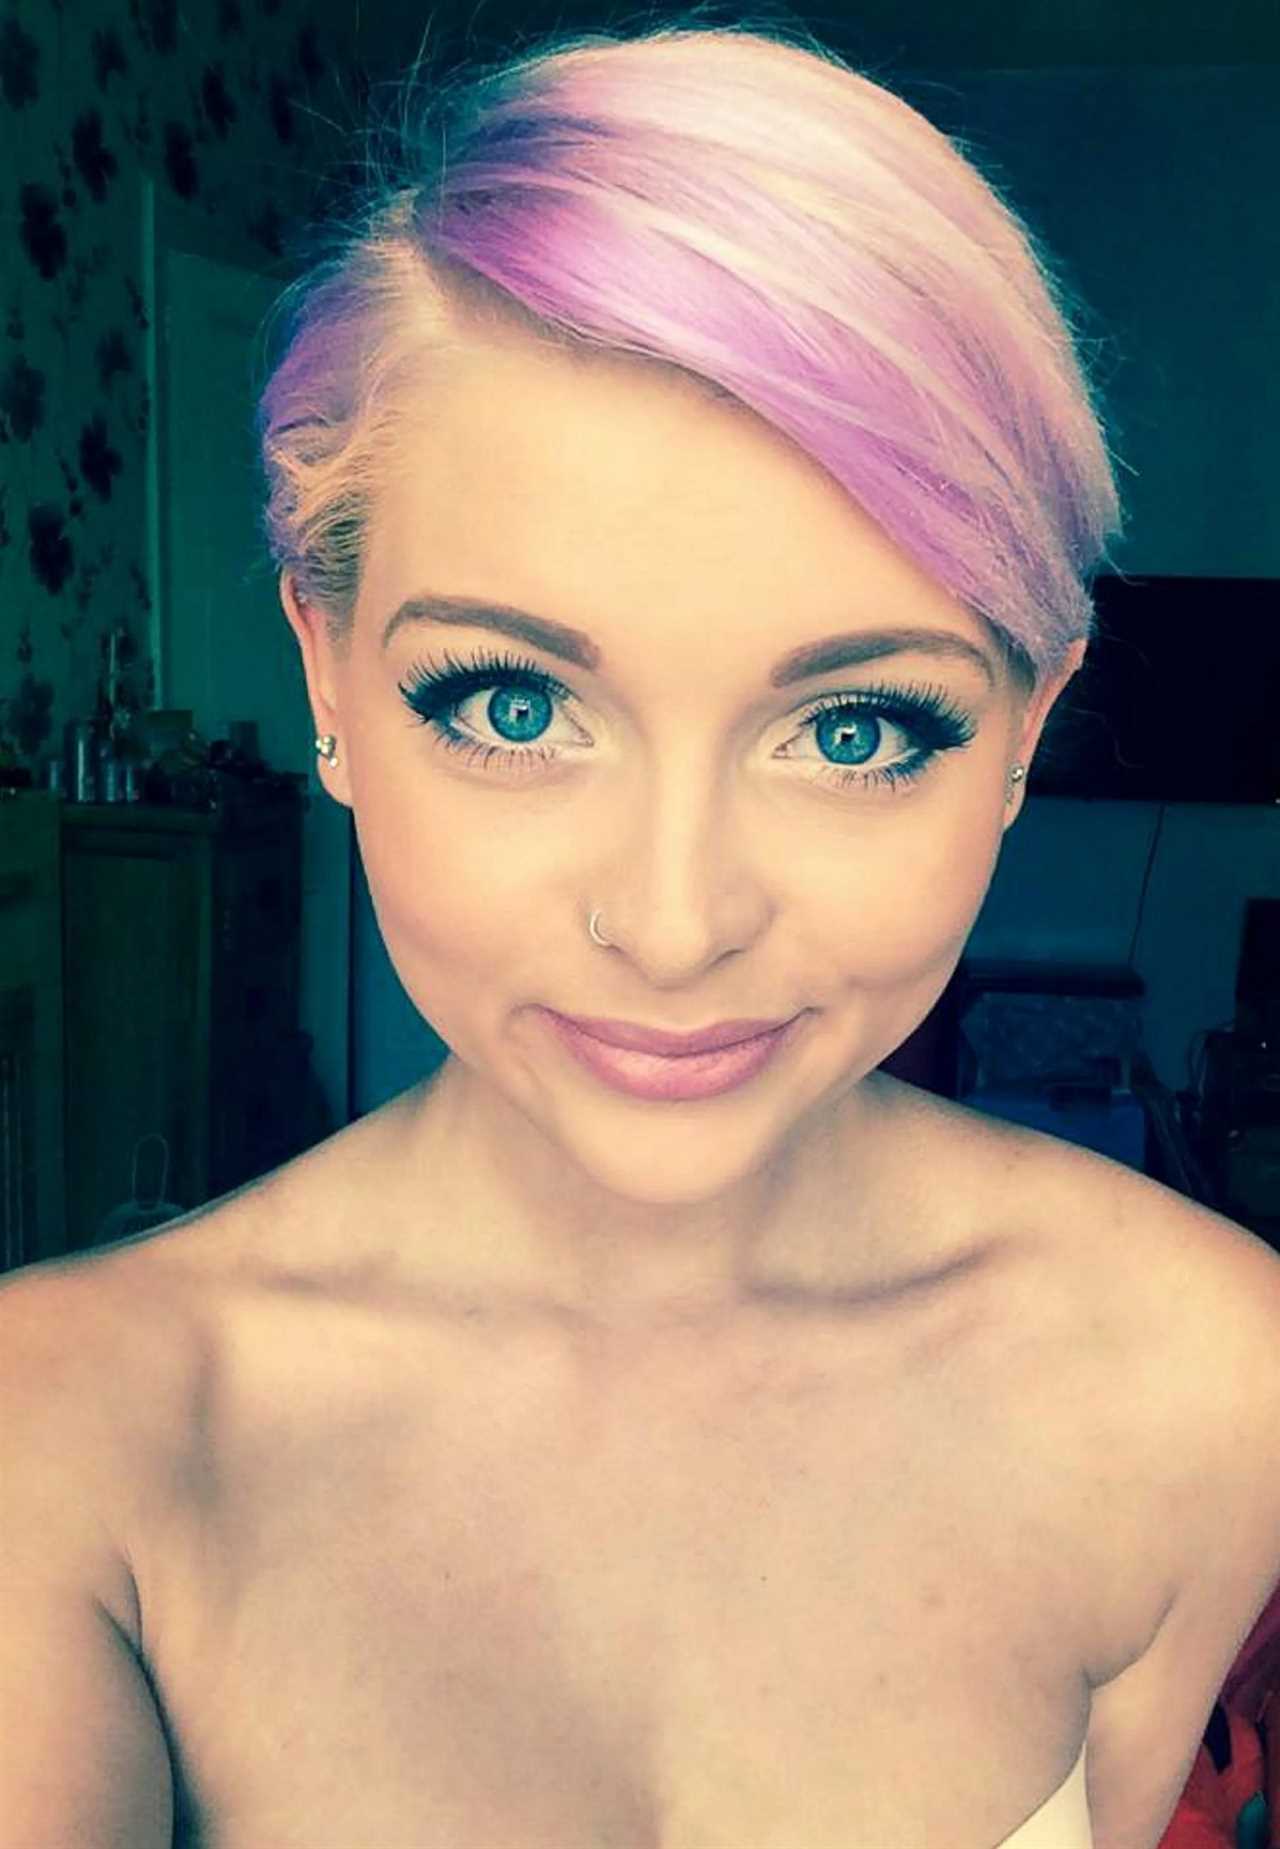 My daughter died of cervical cancer at 27 after GP said her hormones were to blame